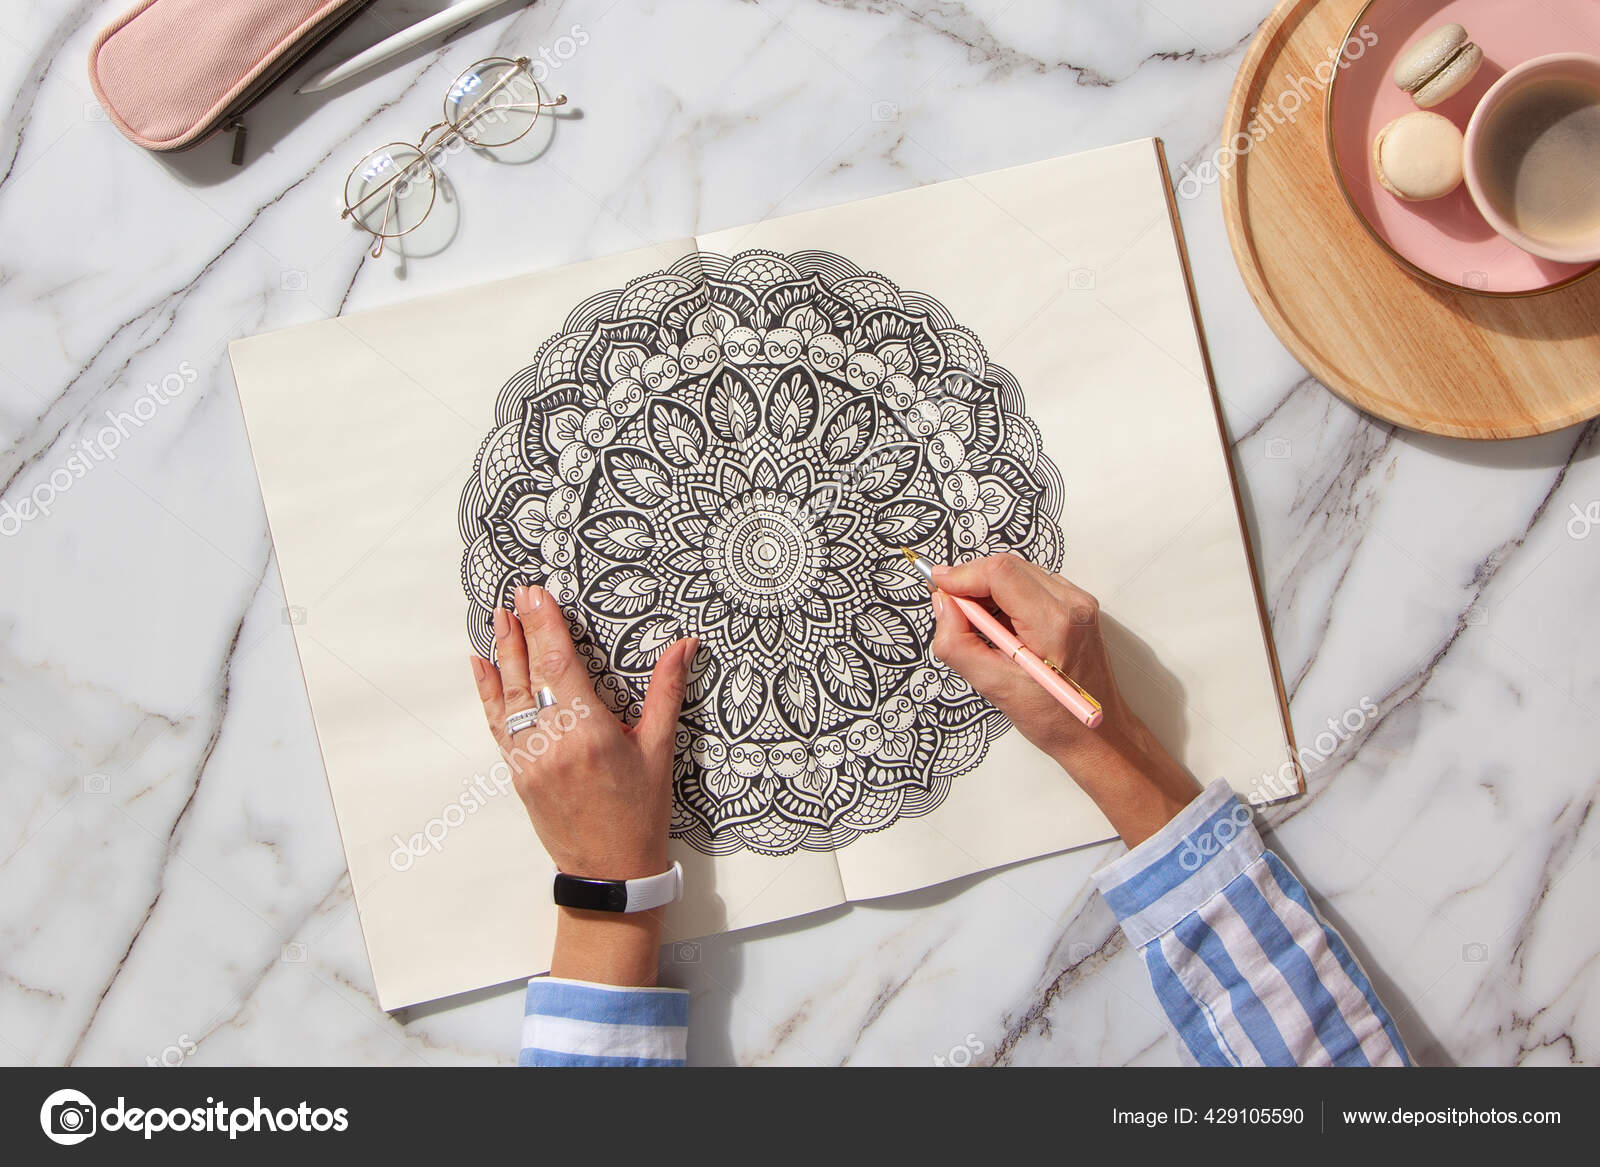 Mandala Art Draw With The Help Of Marker Pens